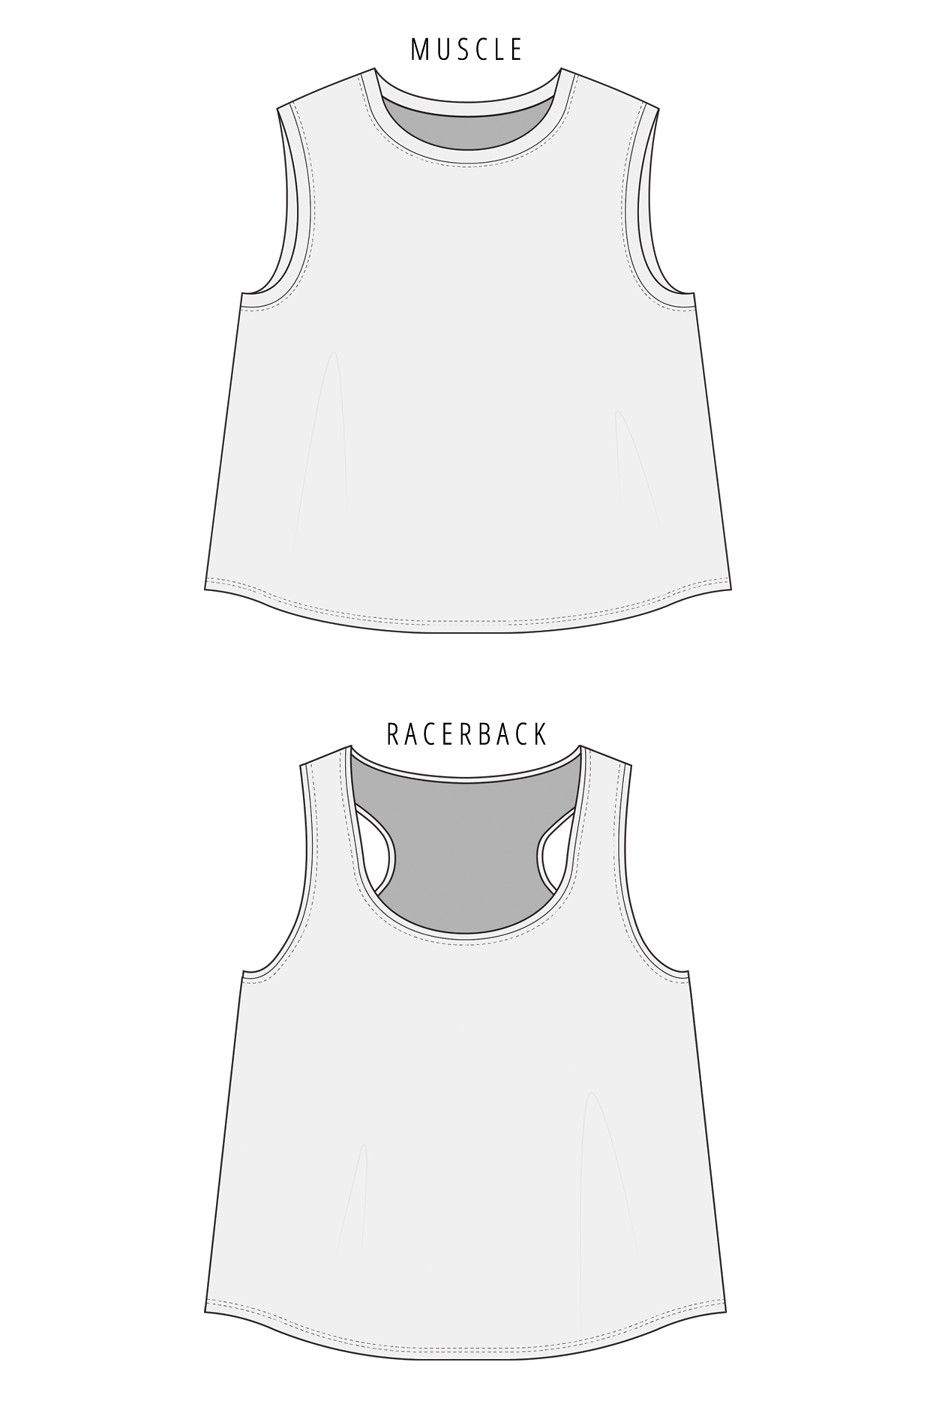 24+ Best Image of Tank Top Sewing Pattern - figswoodfiredbistro.com